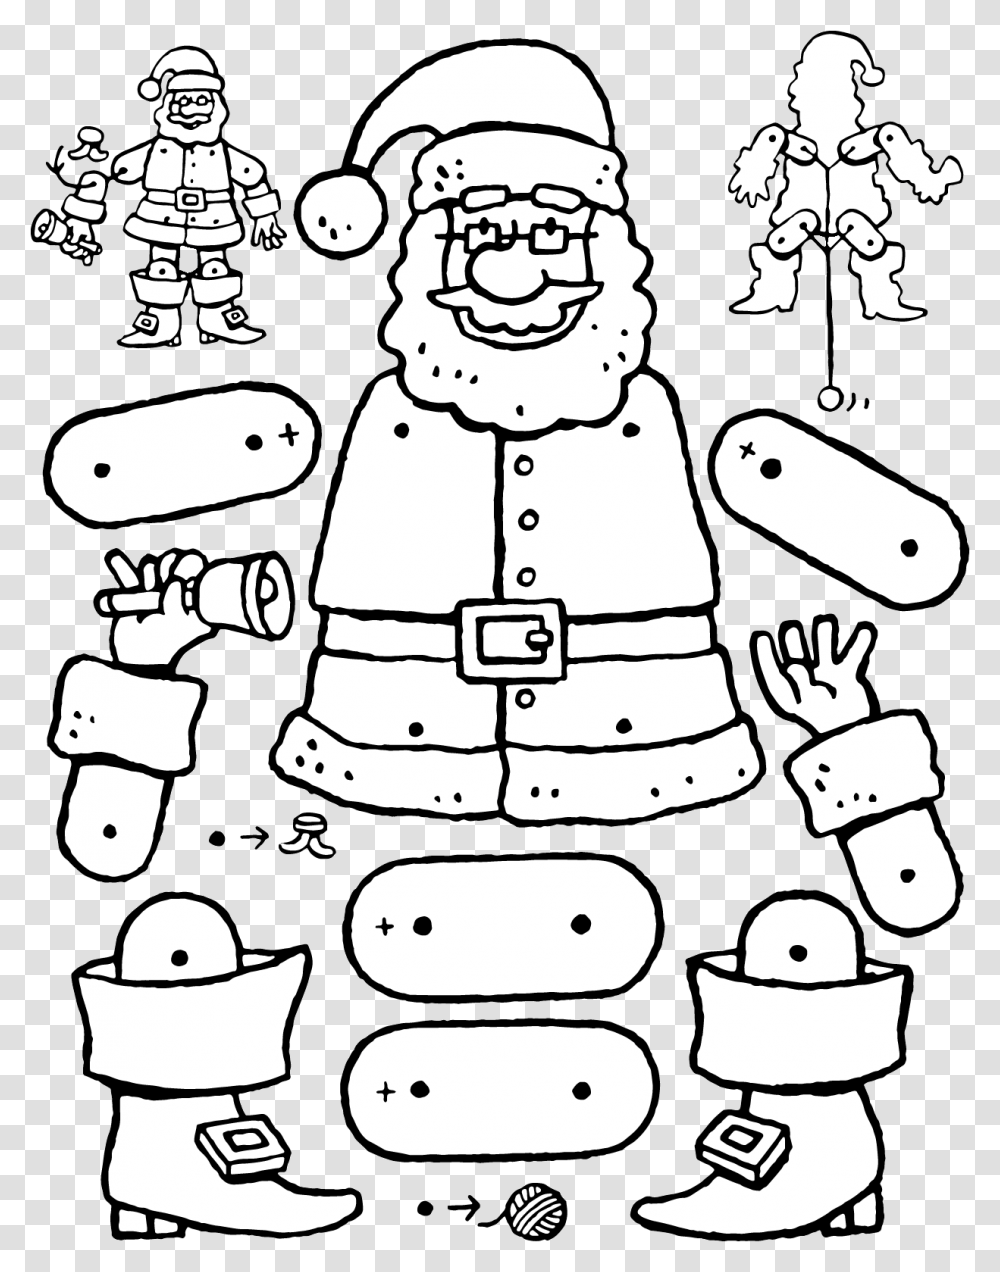 Crafts Dolls Father Christmas Jumping Jack Doll Colouring Coloriage Pantin De Noel, Doodle, Drawing Transparent Png